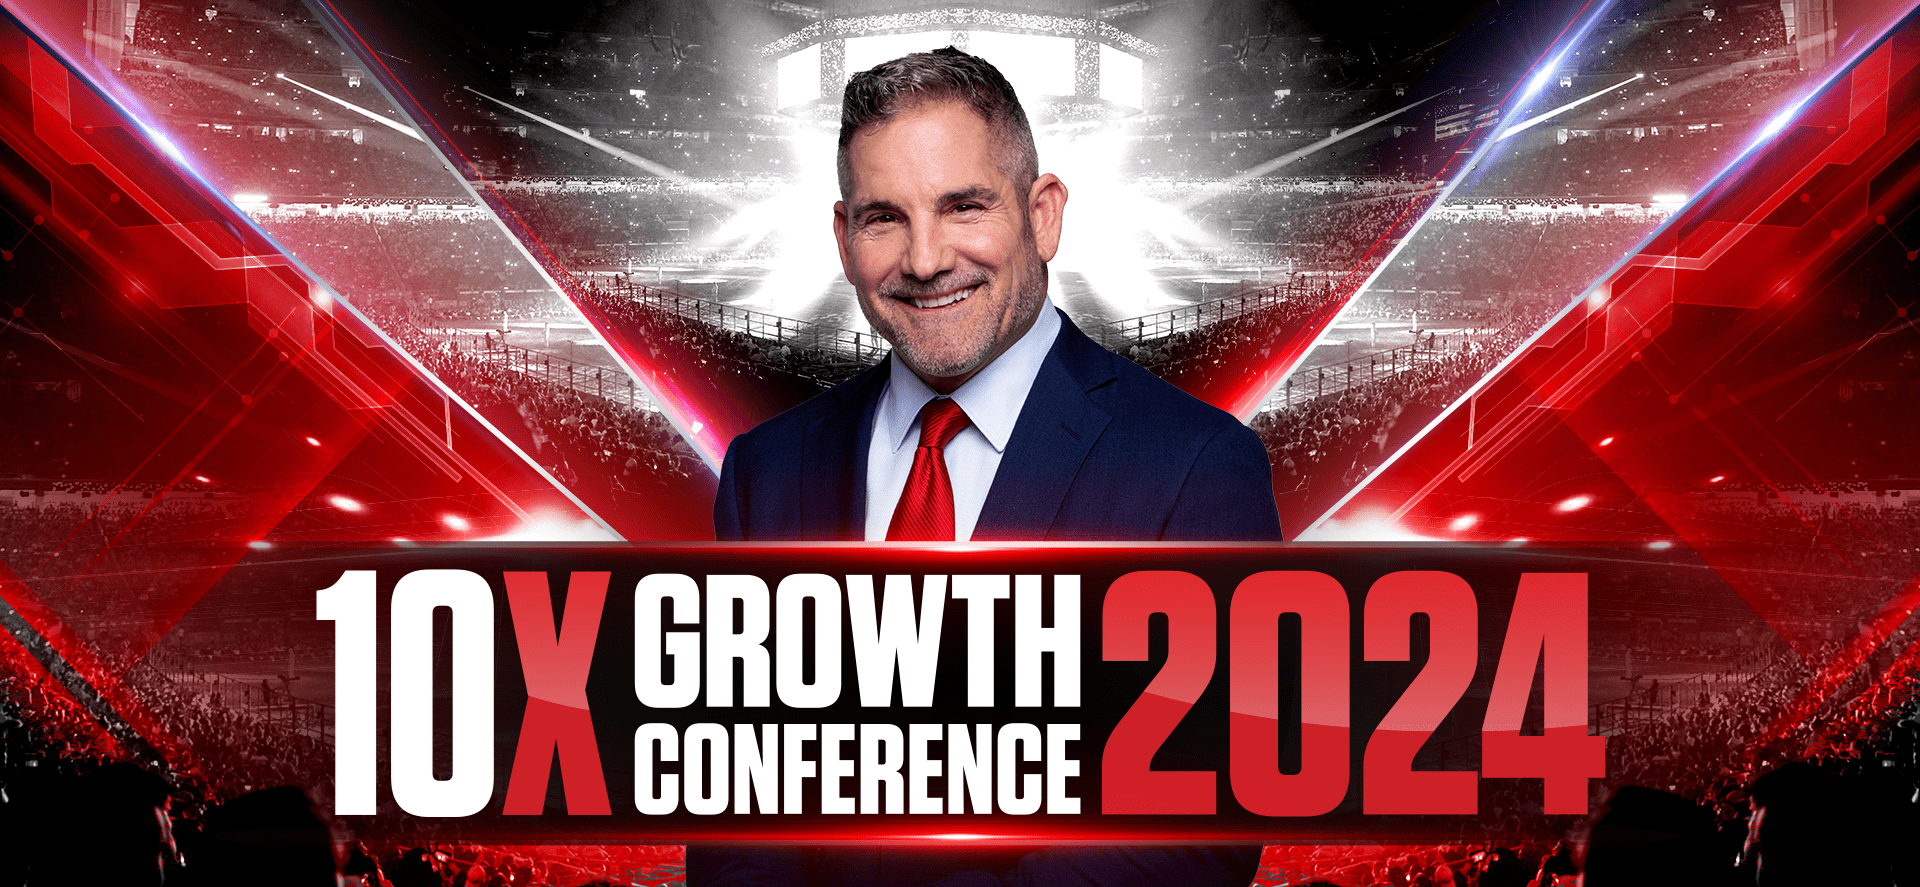 10X Growth Conference 2024 10X Your Business & Life!